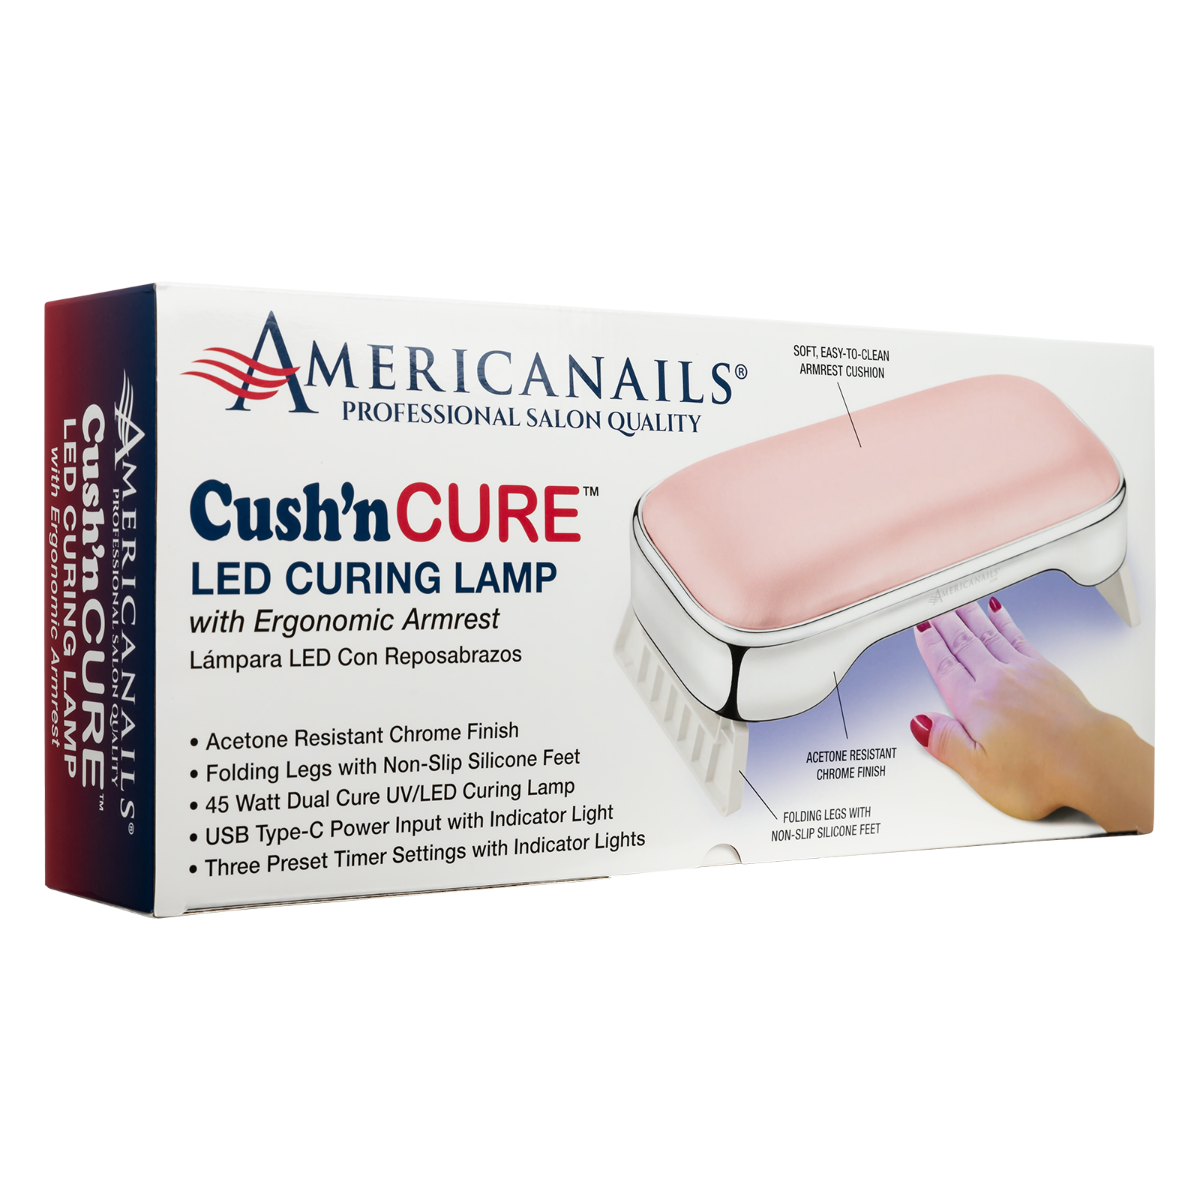 Americanails Cush’n Cure LED Curing Lamp with Armrest 7